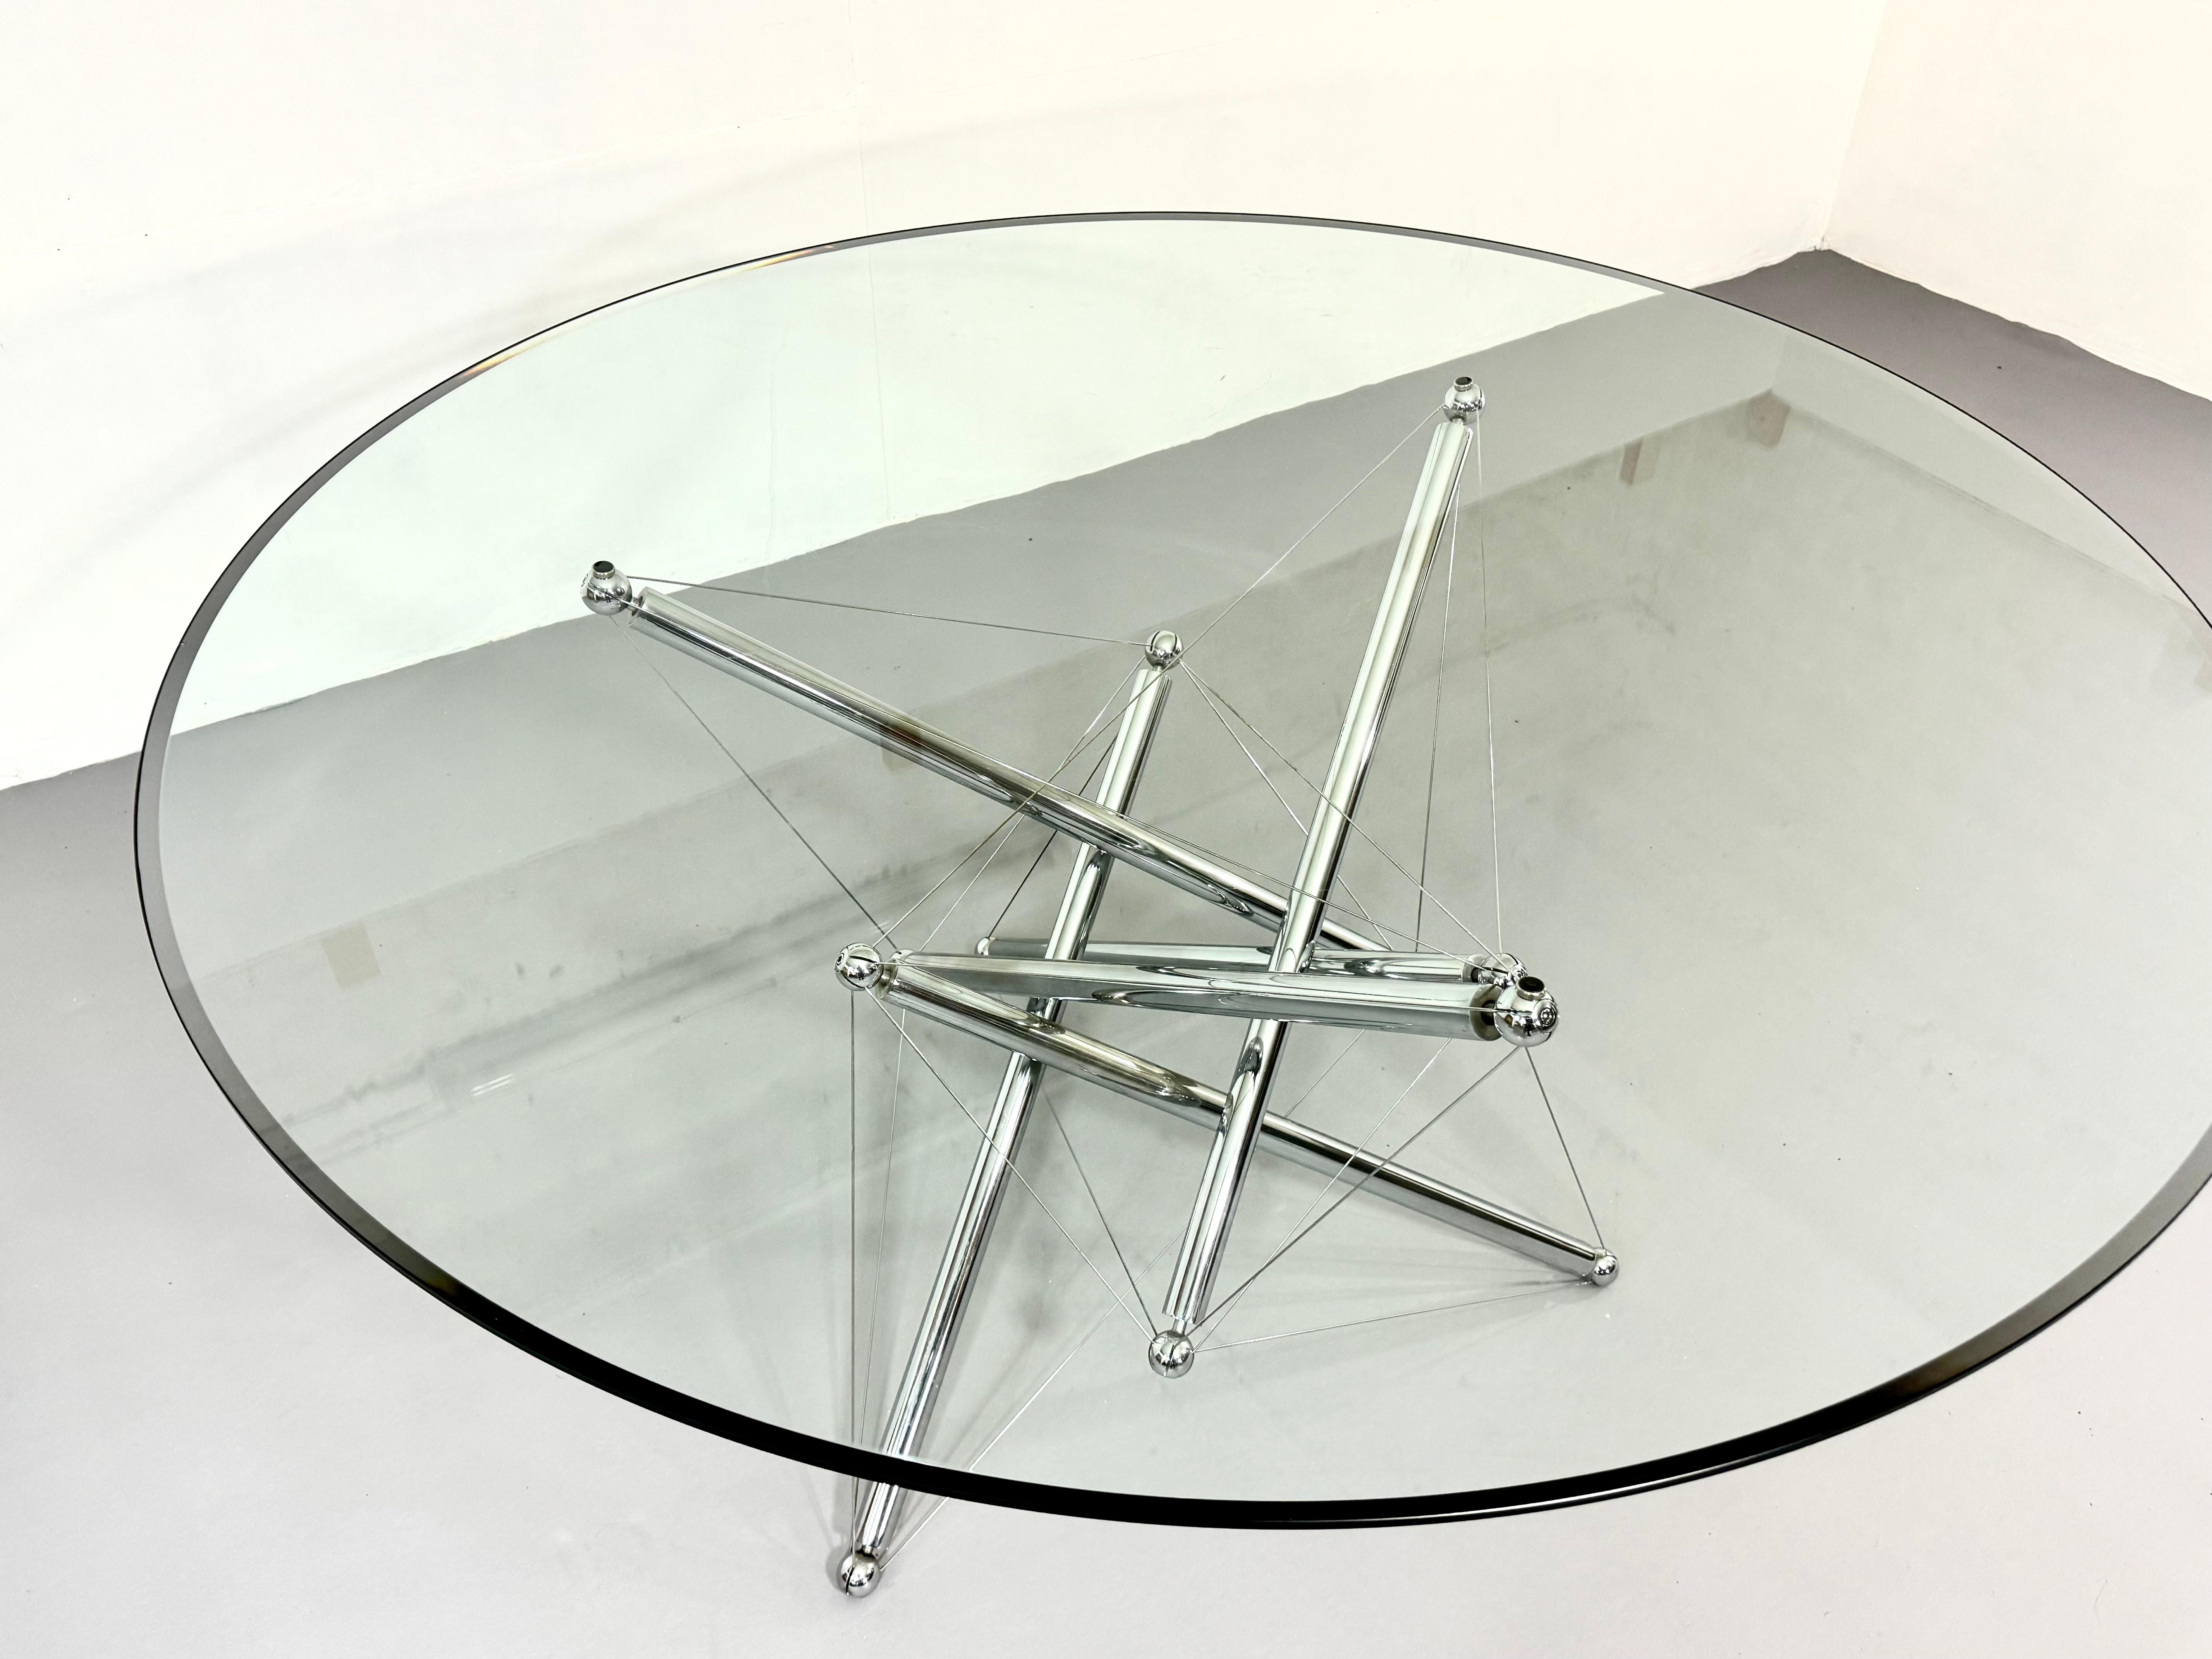 Dive into the world of timeless elegance with the Cassina 714 dining table, a masterpiece of design ingenuity by Theodore Waddell. Crafted in 1973, this iconic table showcases the perfect blend of Italian craftsmanship and avant-garde design, making